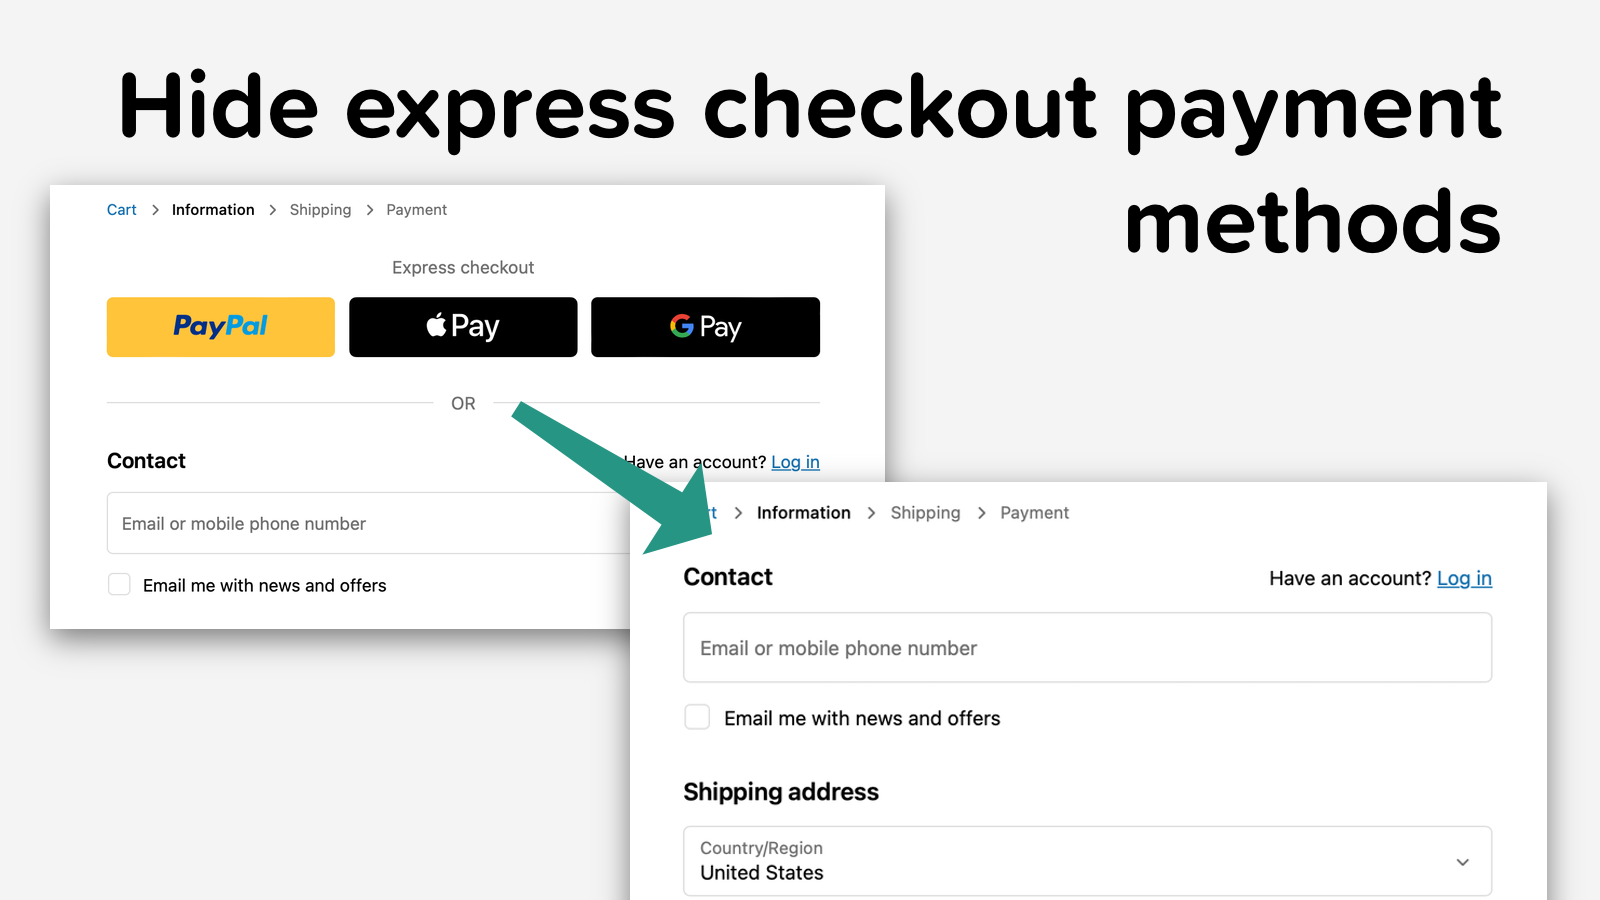 Hide express checkout payment methods on initial checkout step